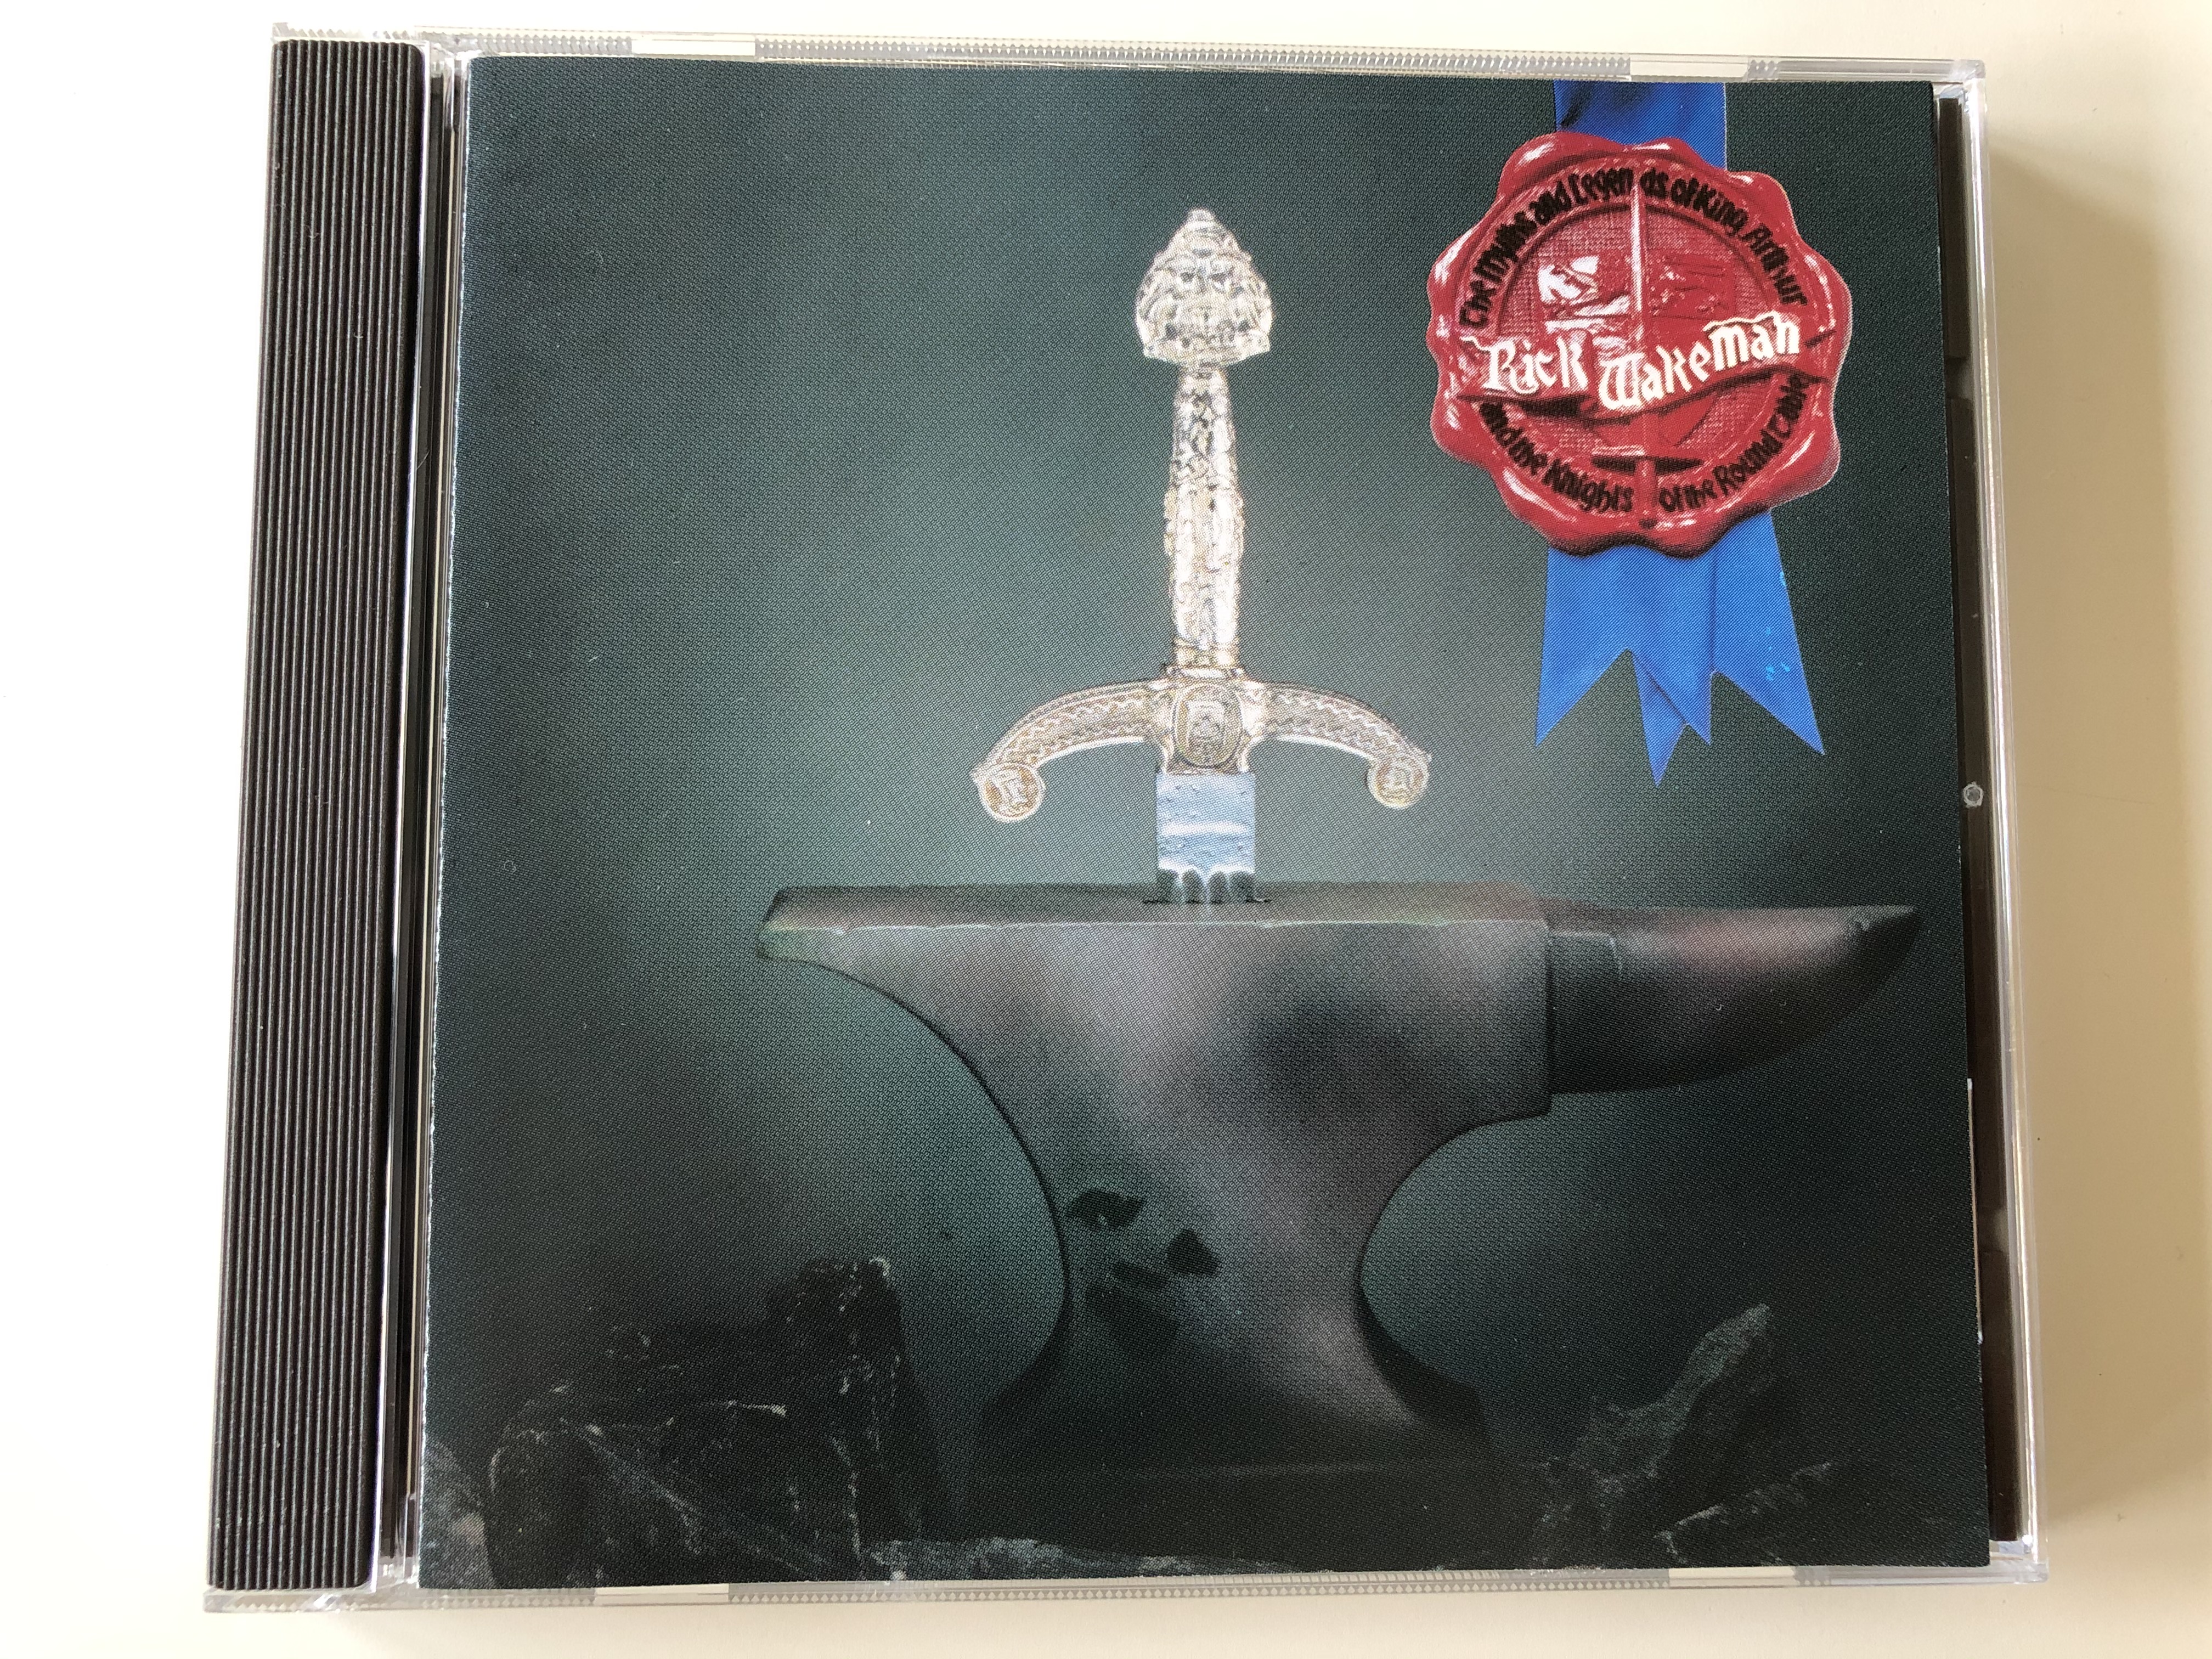 the-myths-and-legends-of-king-arthur-and-the-knights-of-the-round-table-rick-wakeman-a-m-records-audio-cd-1975-394-515-2-1-.jpg